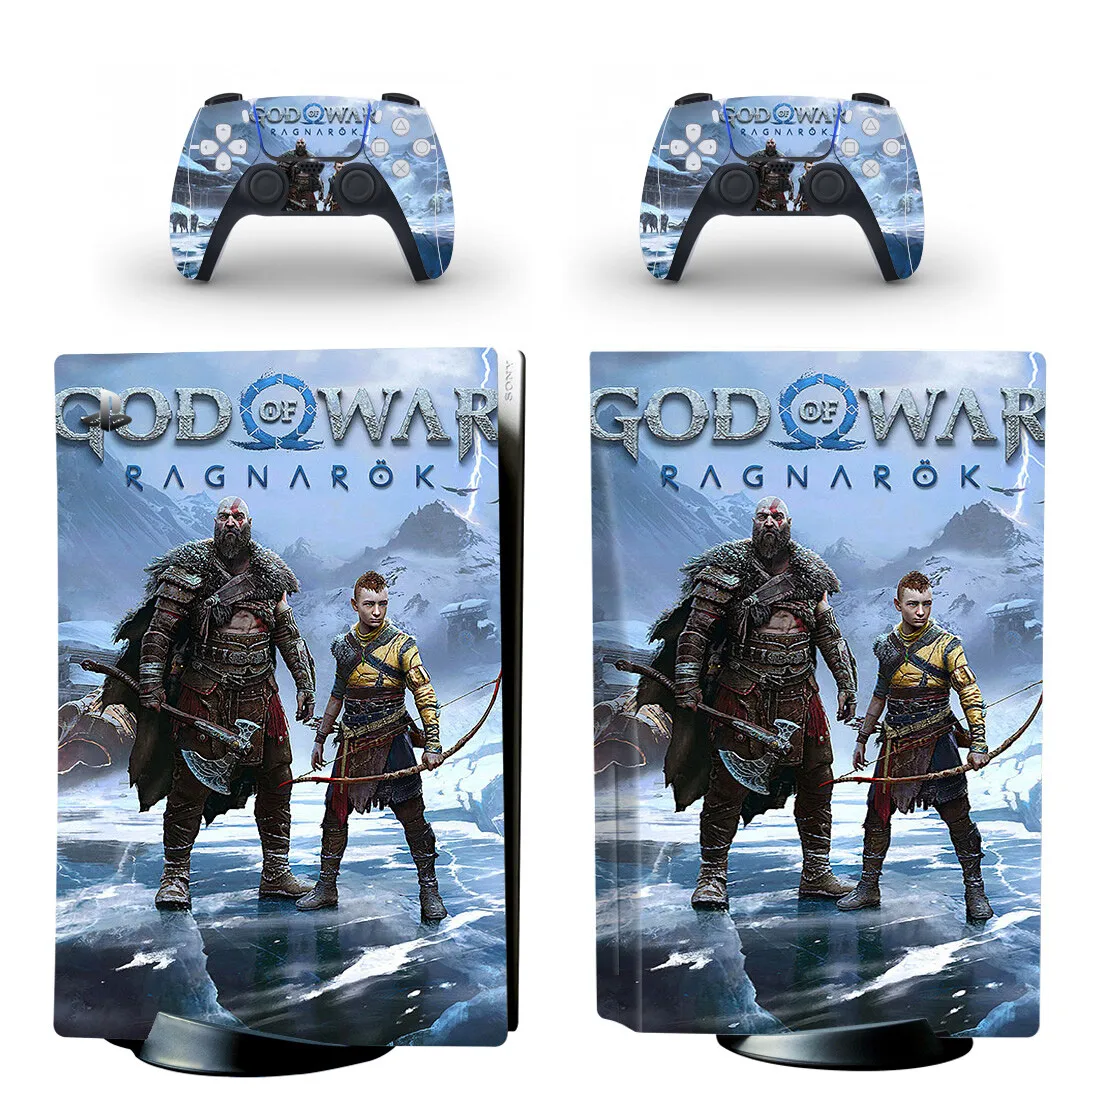 

Game God of War PS5 Disc Skin Sticker Cover for Playstation 5 Console & Controllers Decal Vinyl Protective Disk Skins